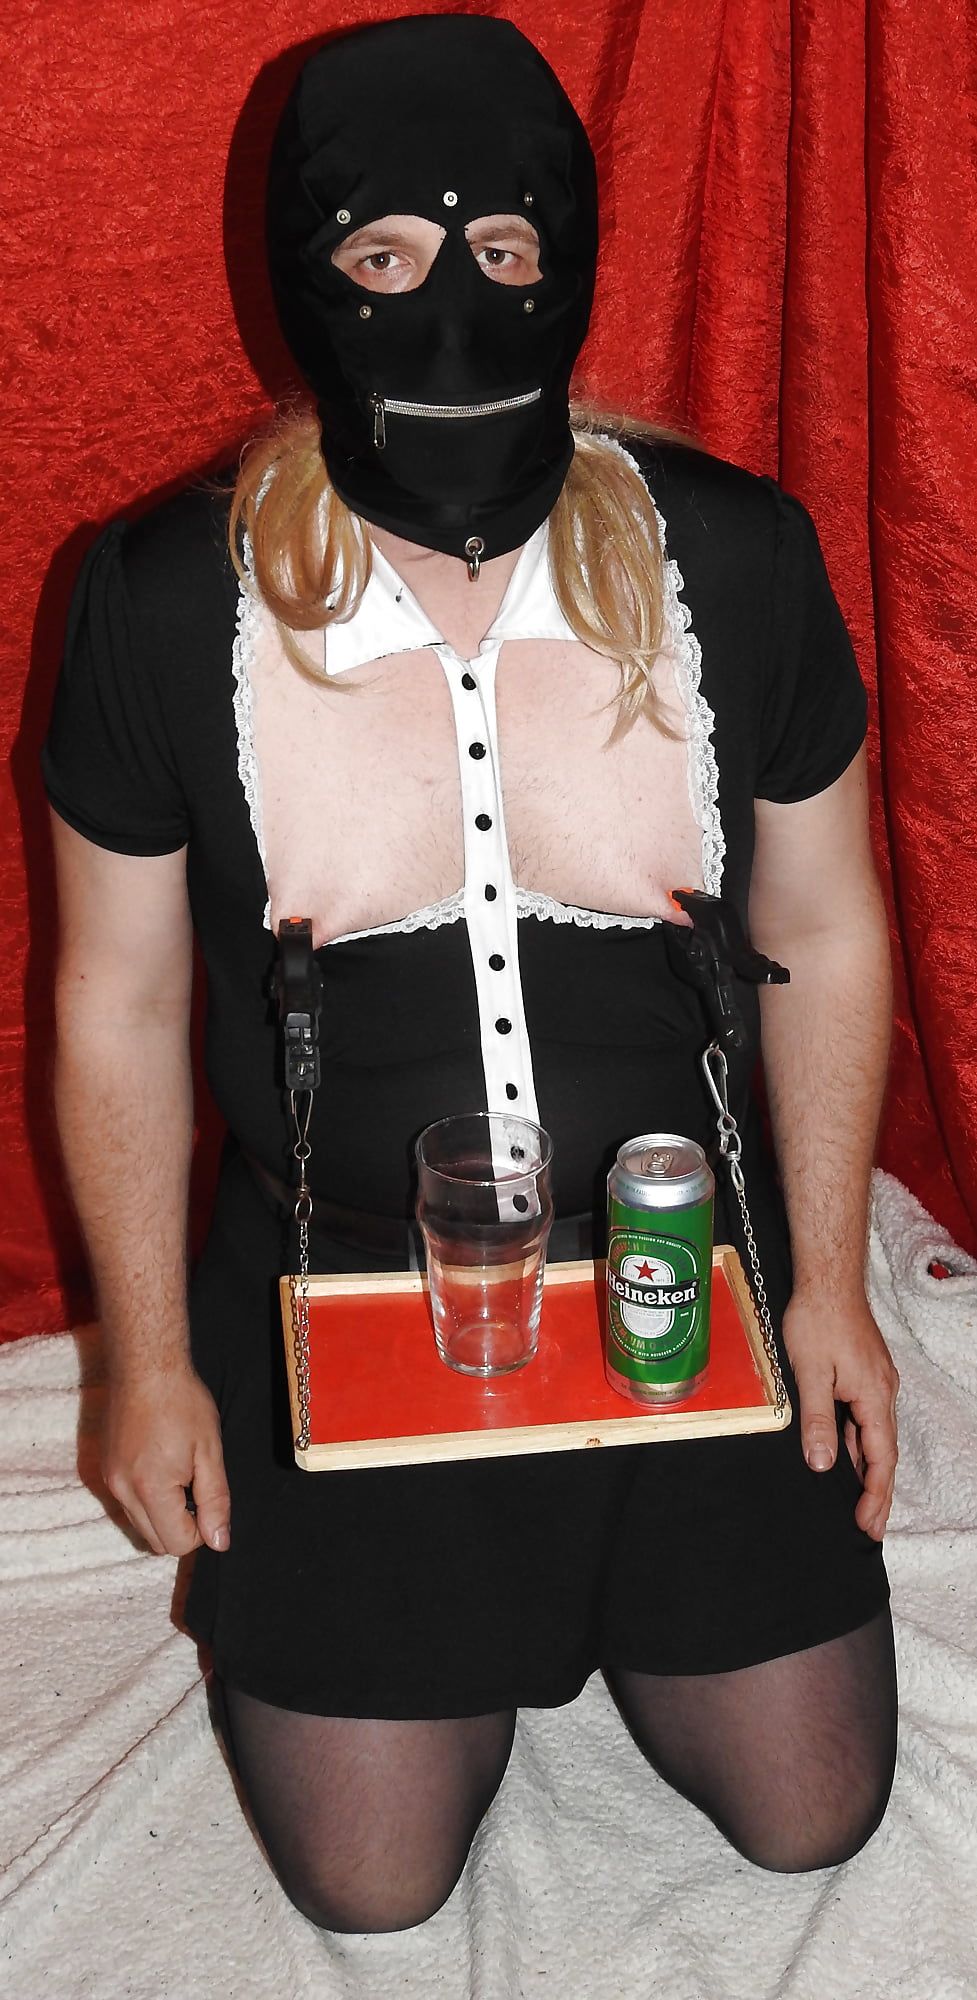 Sissy Served drinks by Glass #9